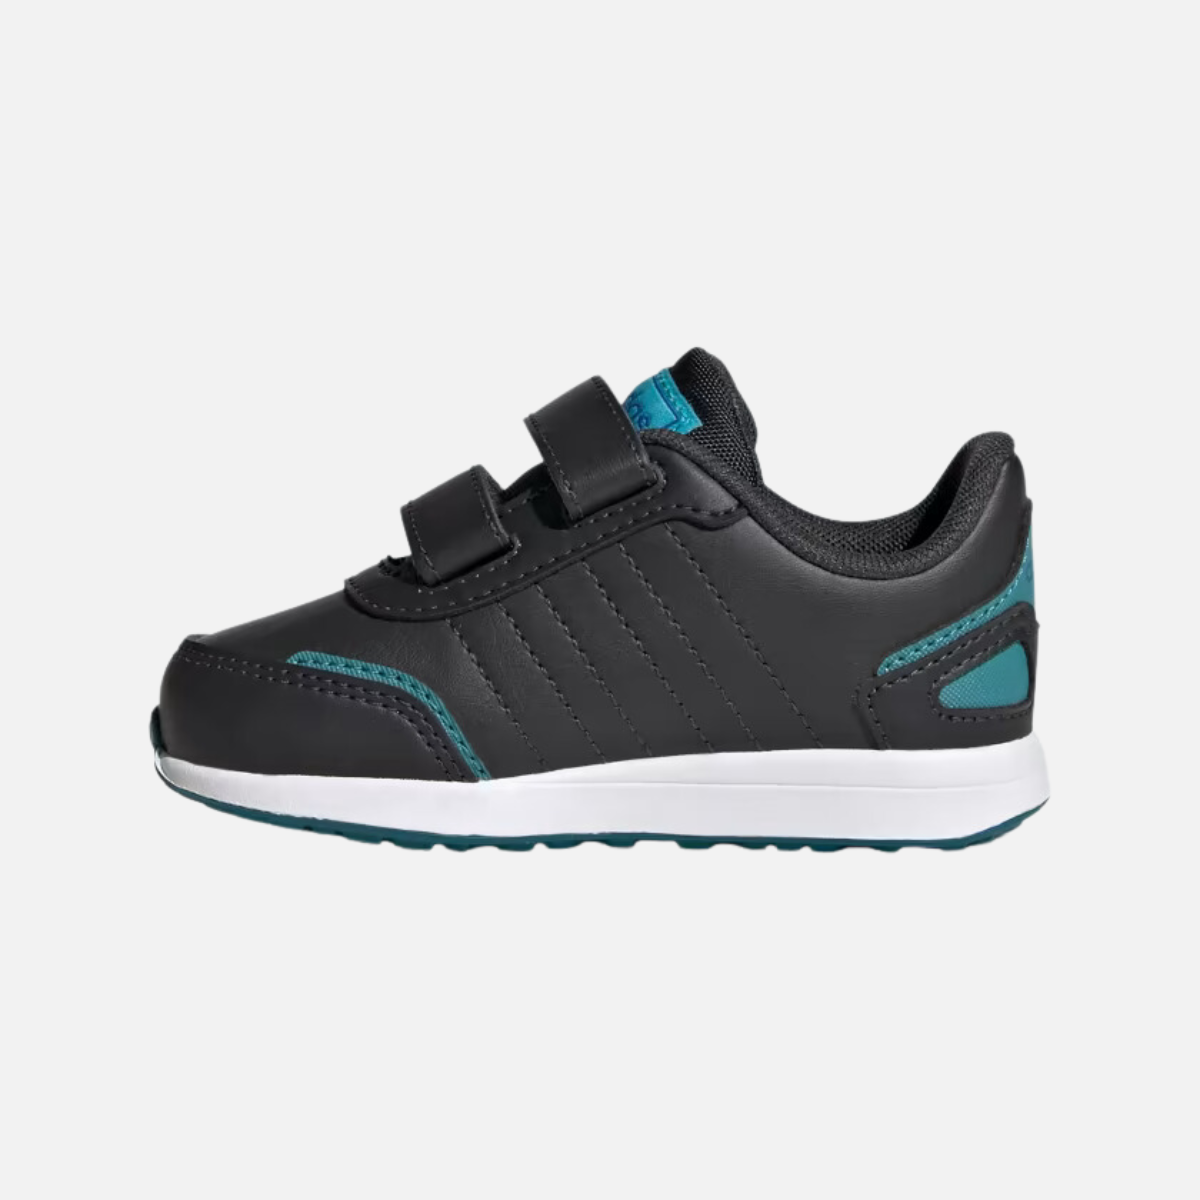 Adidas VS Switch 3 Lifestyle Running Hook and Loop Straps Kids Unisex Shoes (0 -3 year) -Carbon/Bright Royal/Arctic Fusion